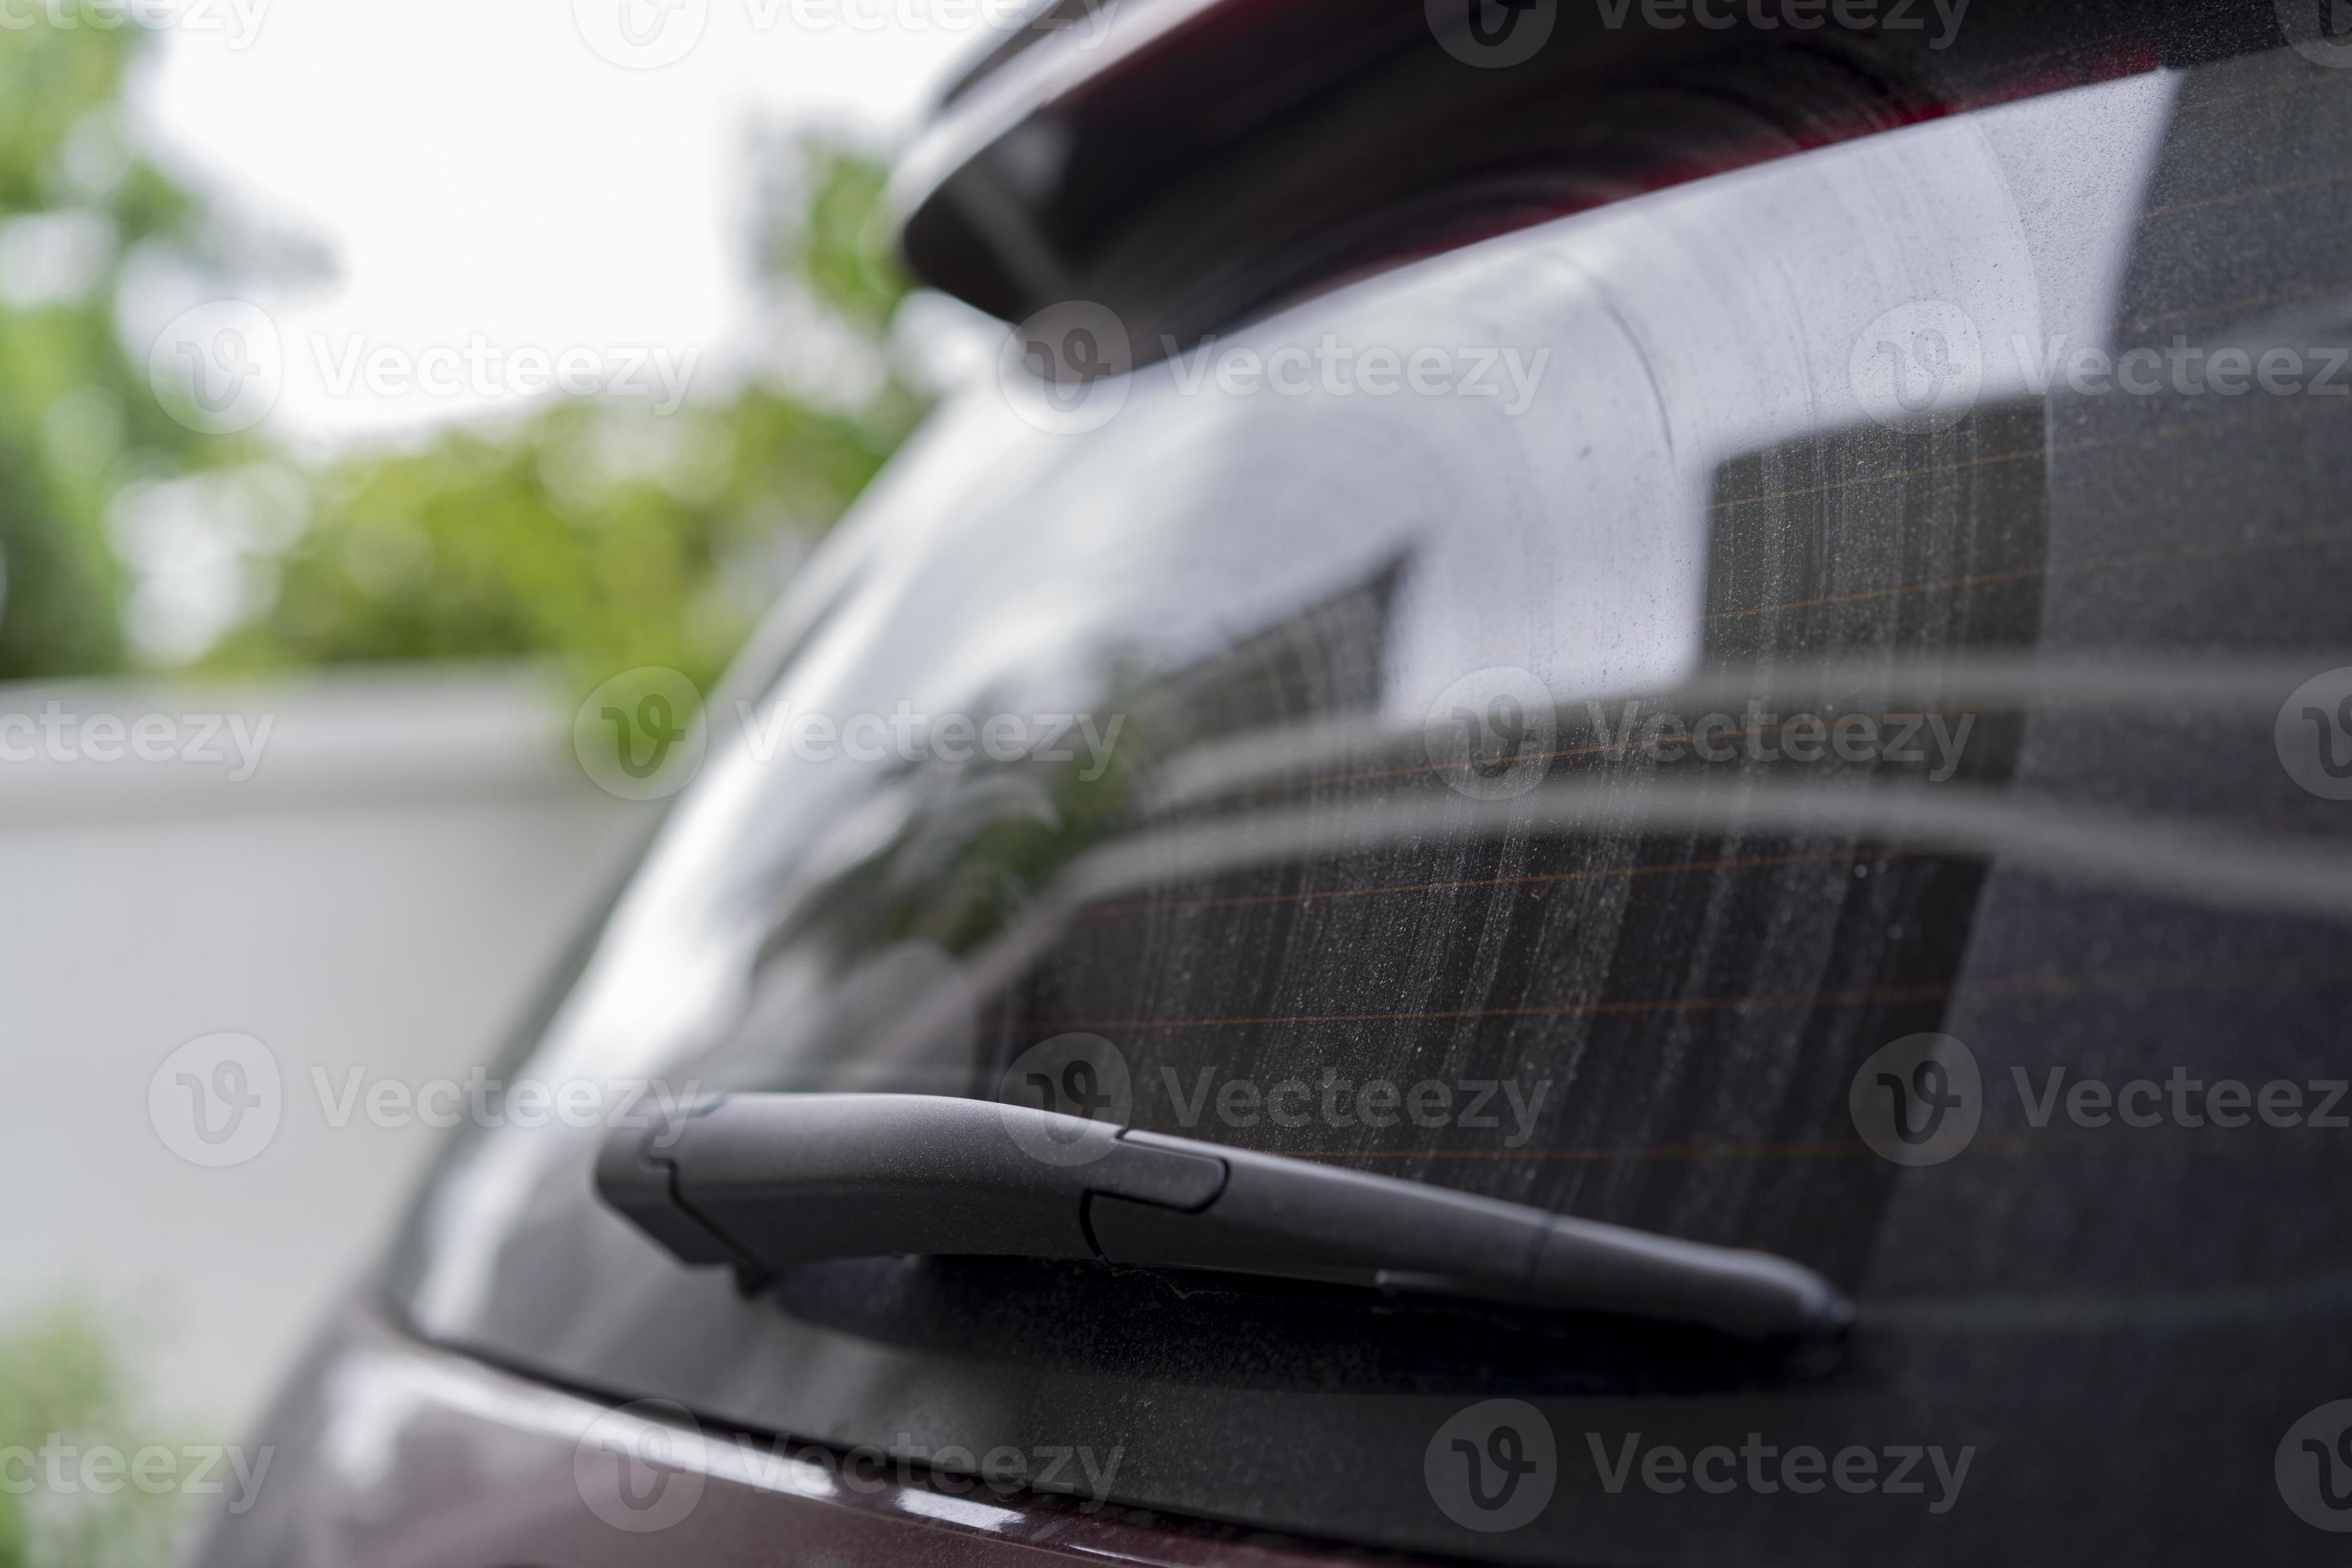 https://static.vecteezy.com/system/resources/previews/007/293/093/large_2x/wiper-at-back-mirror-of-the-card-with-dirty-and-dust-on-it-it-can-use-in-service-washing-cleaning-car-care-photo.JPG